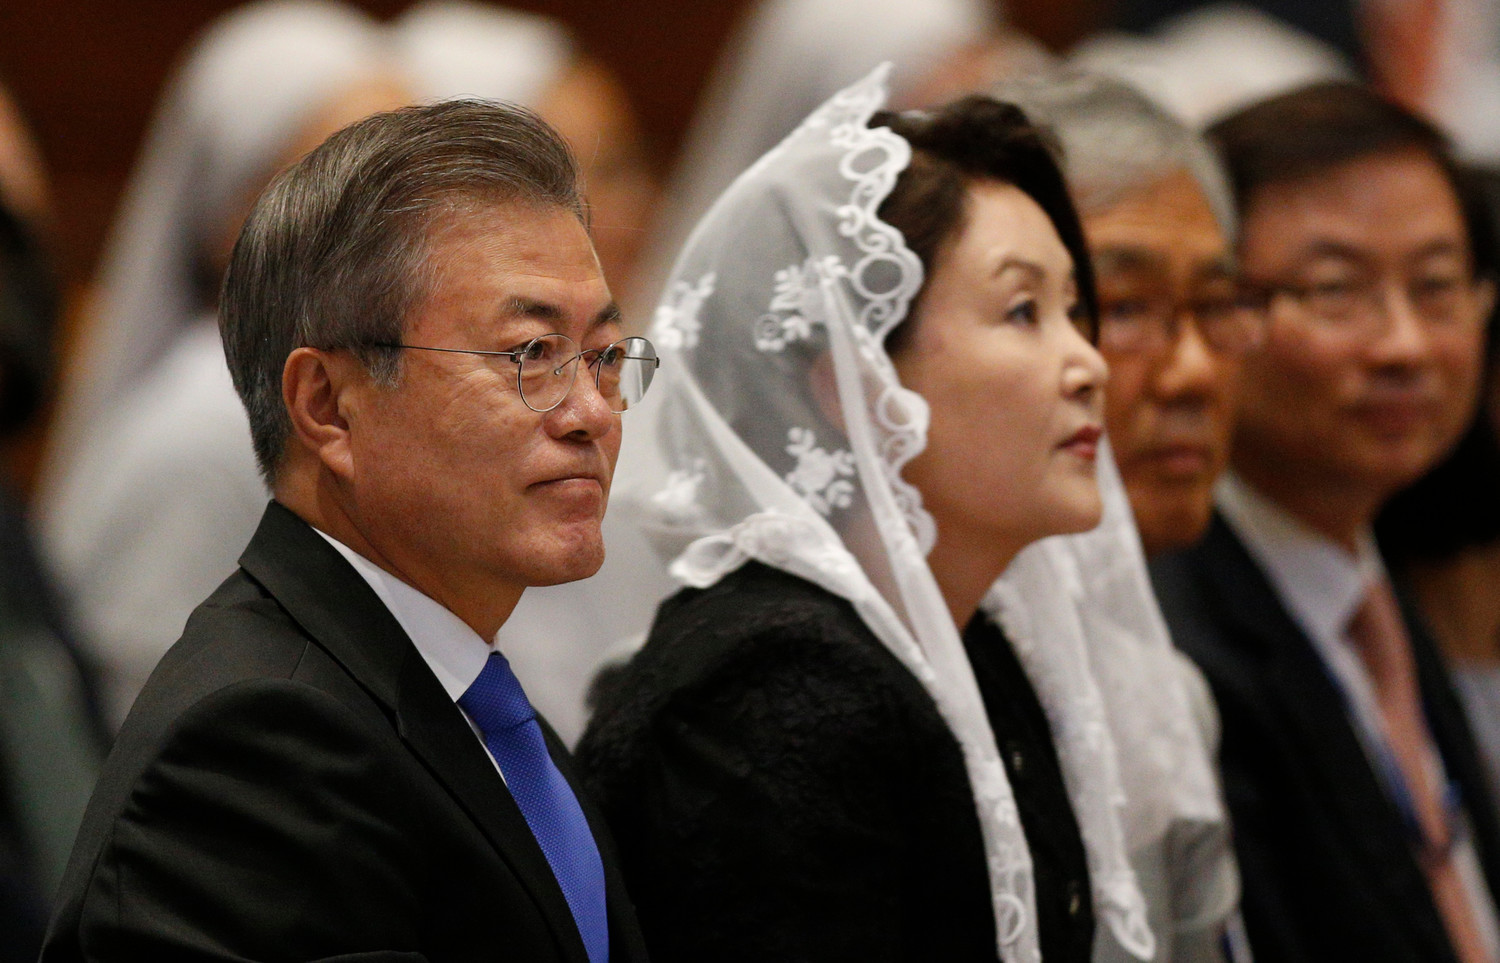 South Korean President Moon Jae-in, left, attends a Mass for peace for the Korean peninsula in St. Peter’s Basilica at the Vatican Oct. 17. The Mass was celebrated by Cardinal Pietro Parolin, Vatican secretary of state.